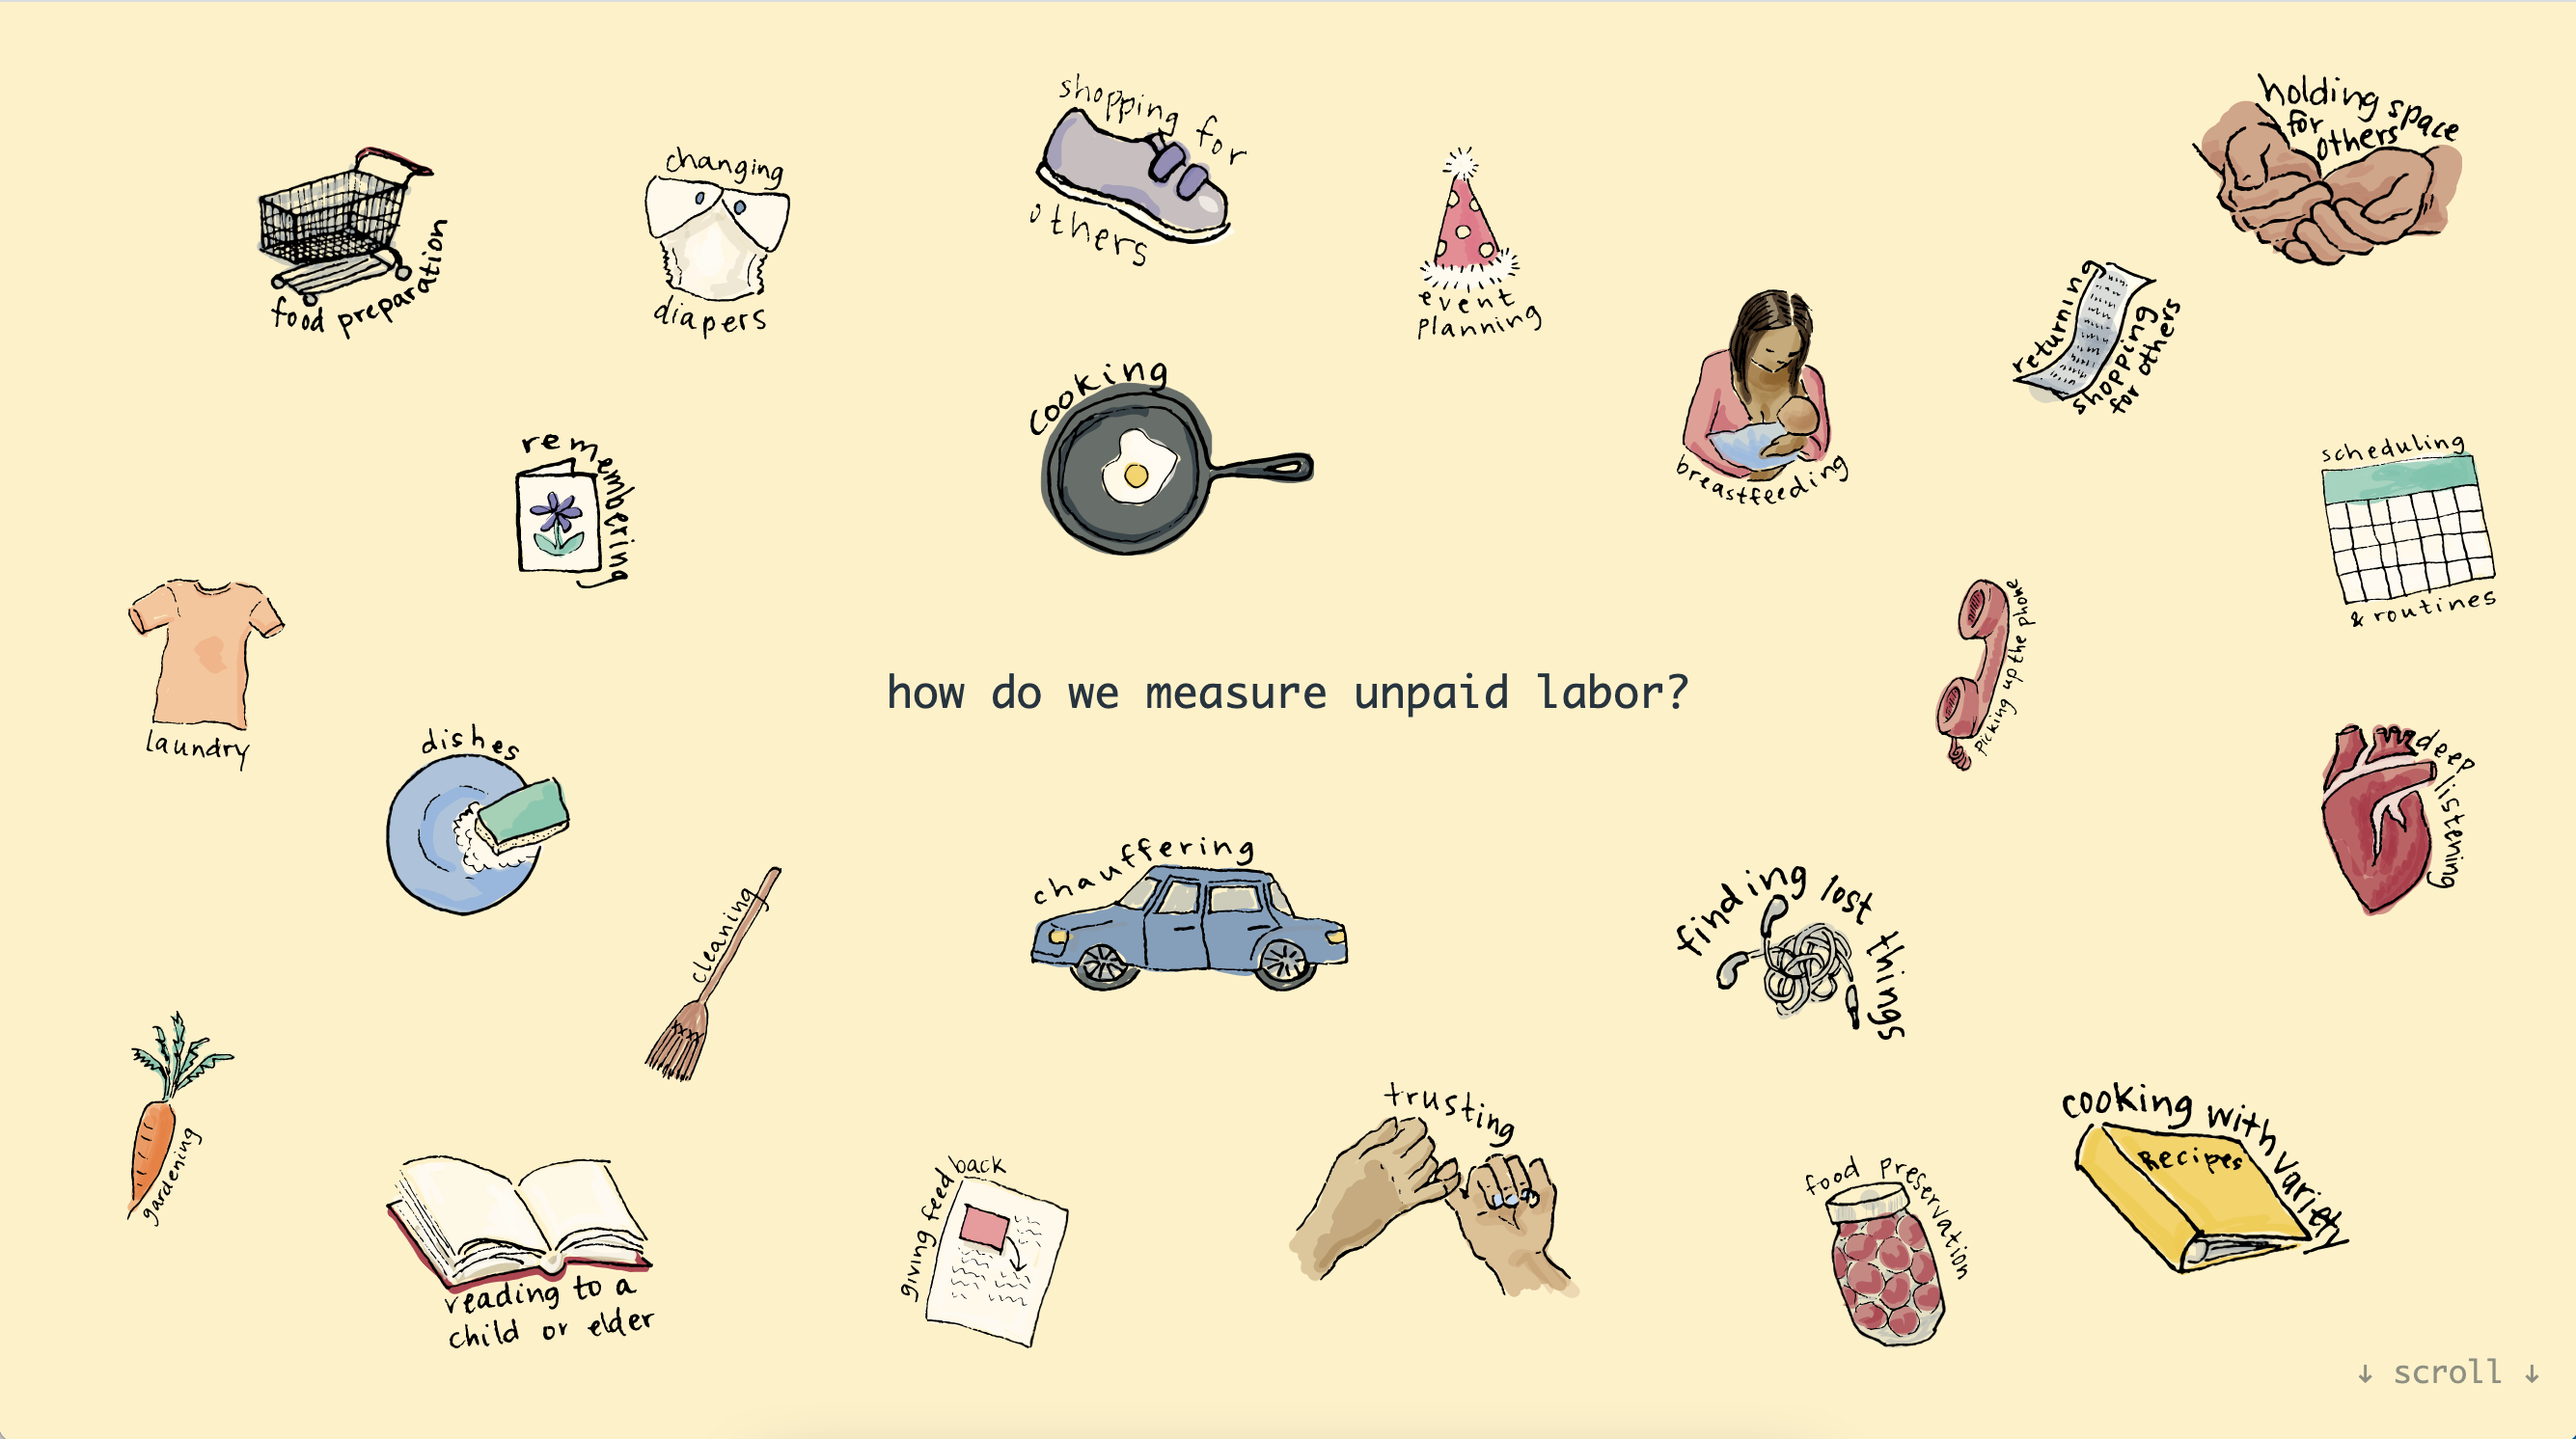 hand-made colored icons of domestic tasks and forms of care, arranged around the question 'how do we measure unpaid labor?'.